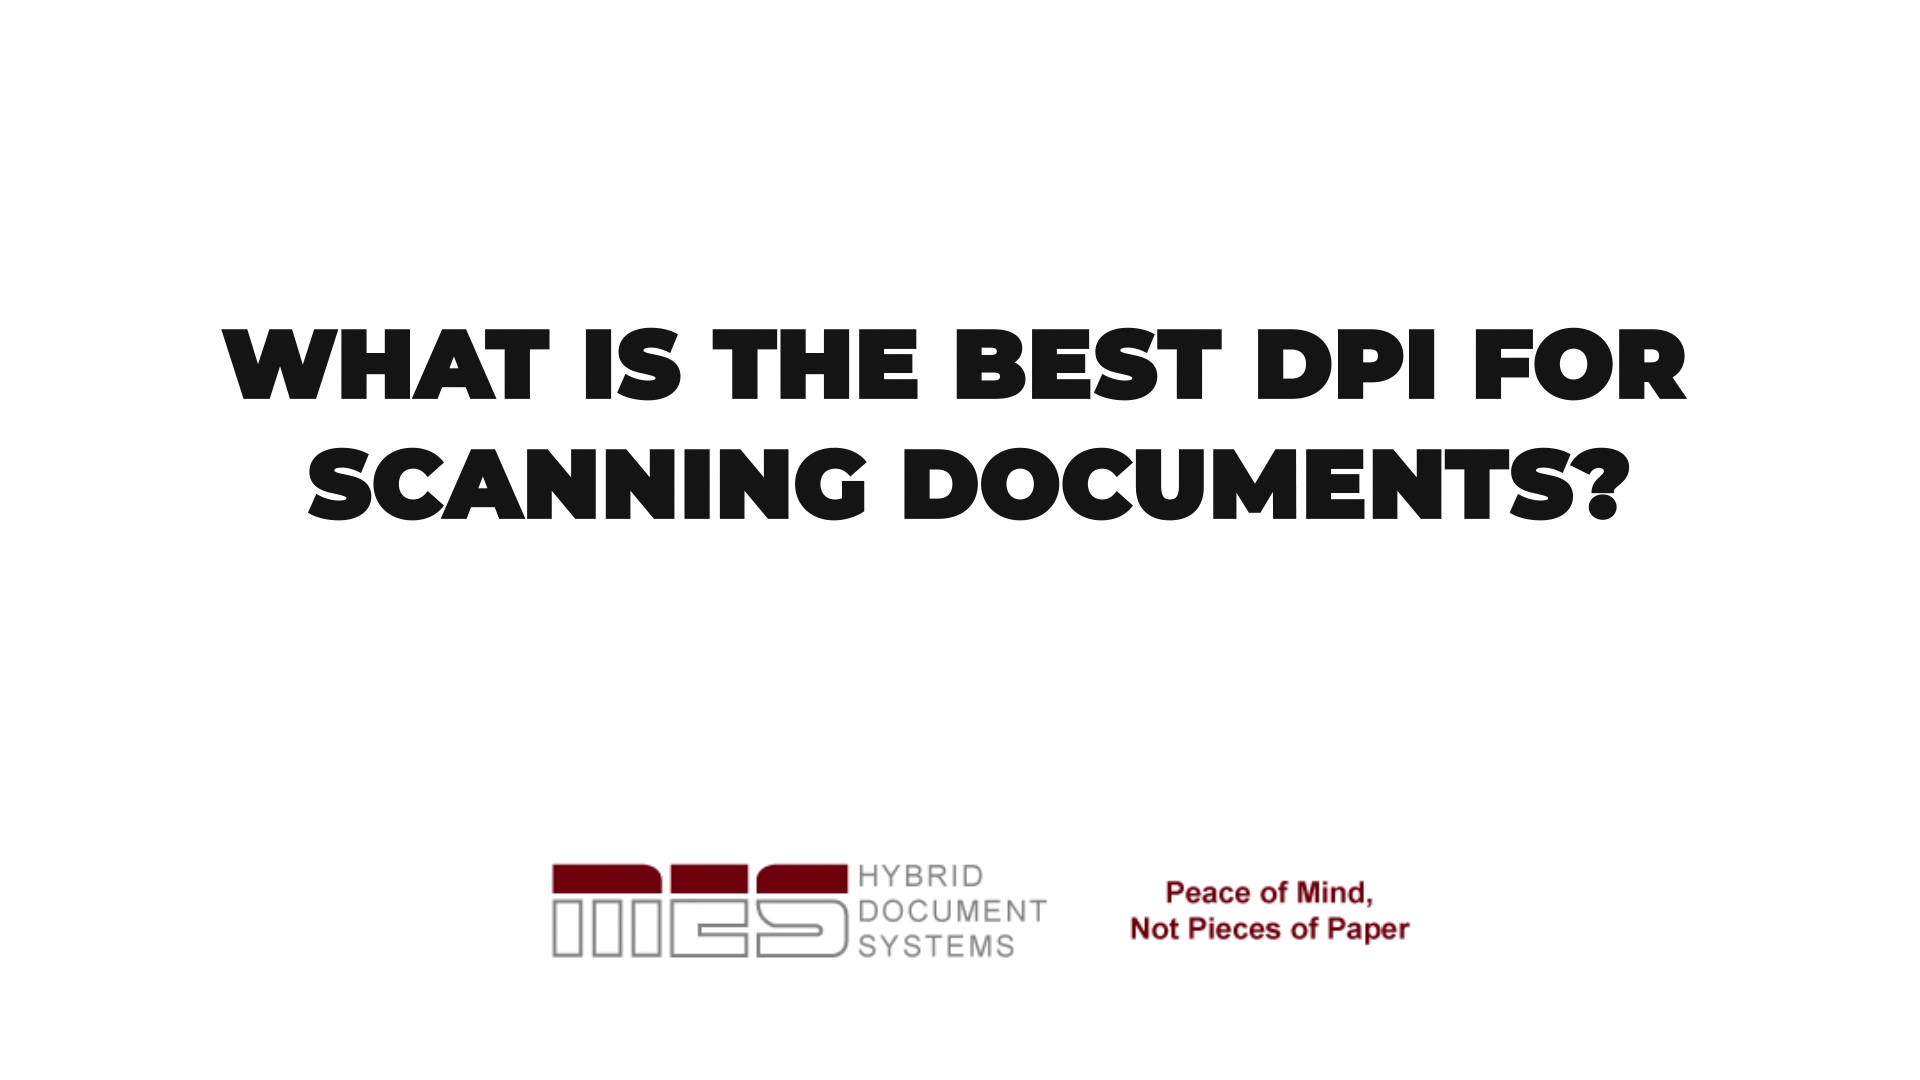 A Brief History of Document Scanning